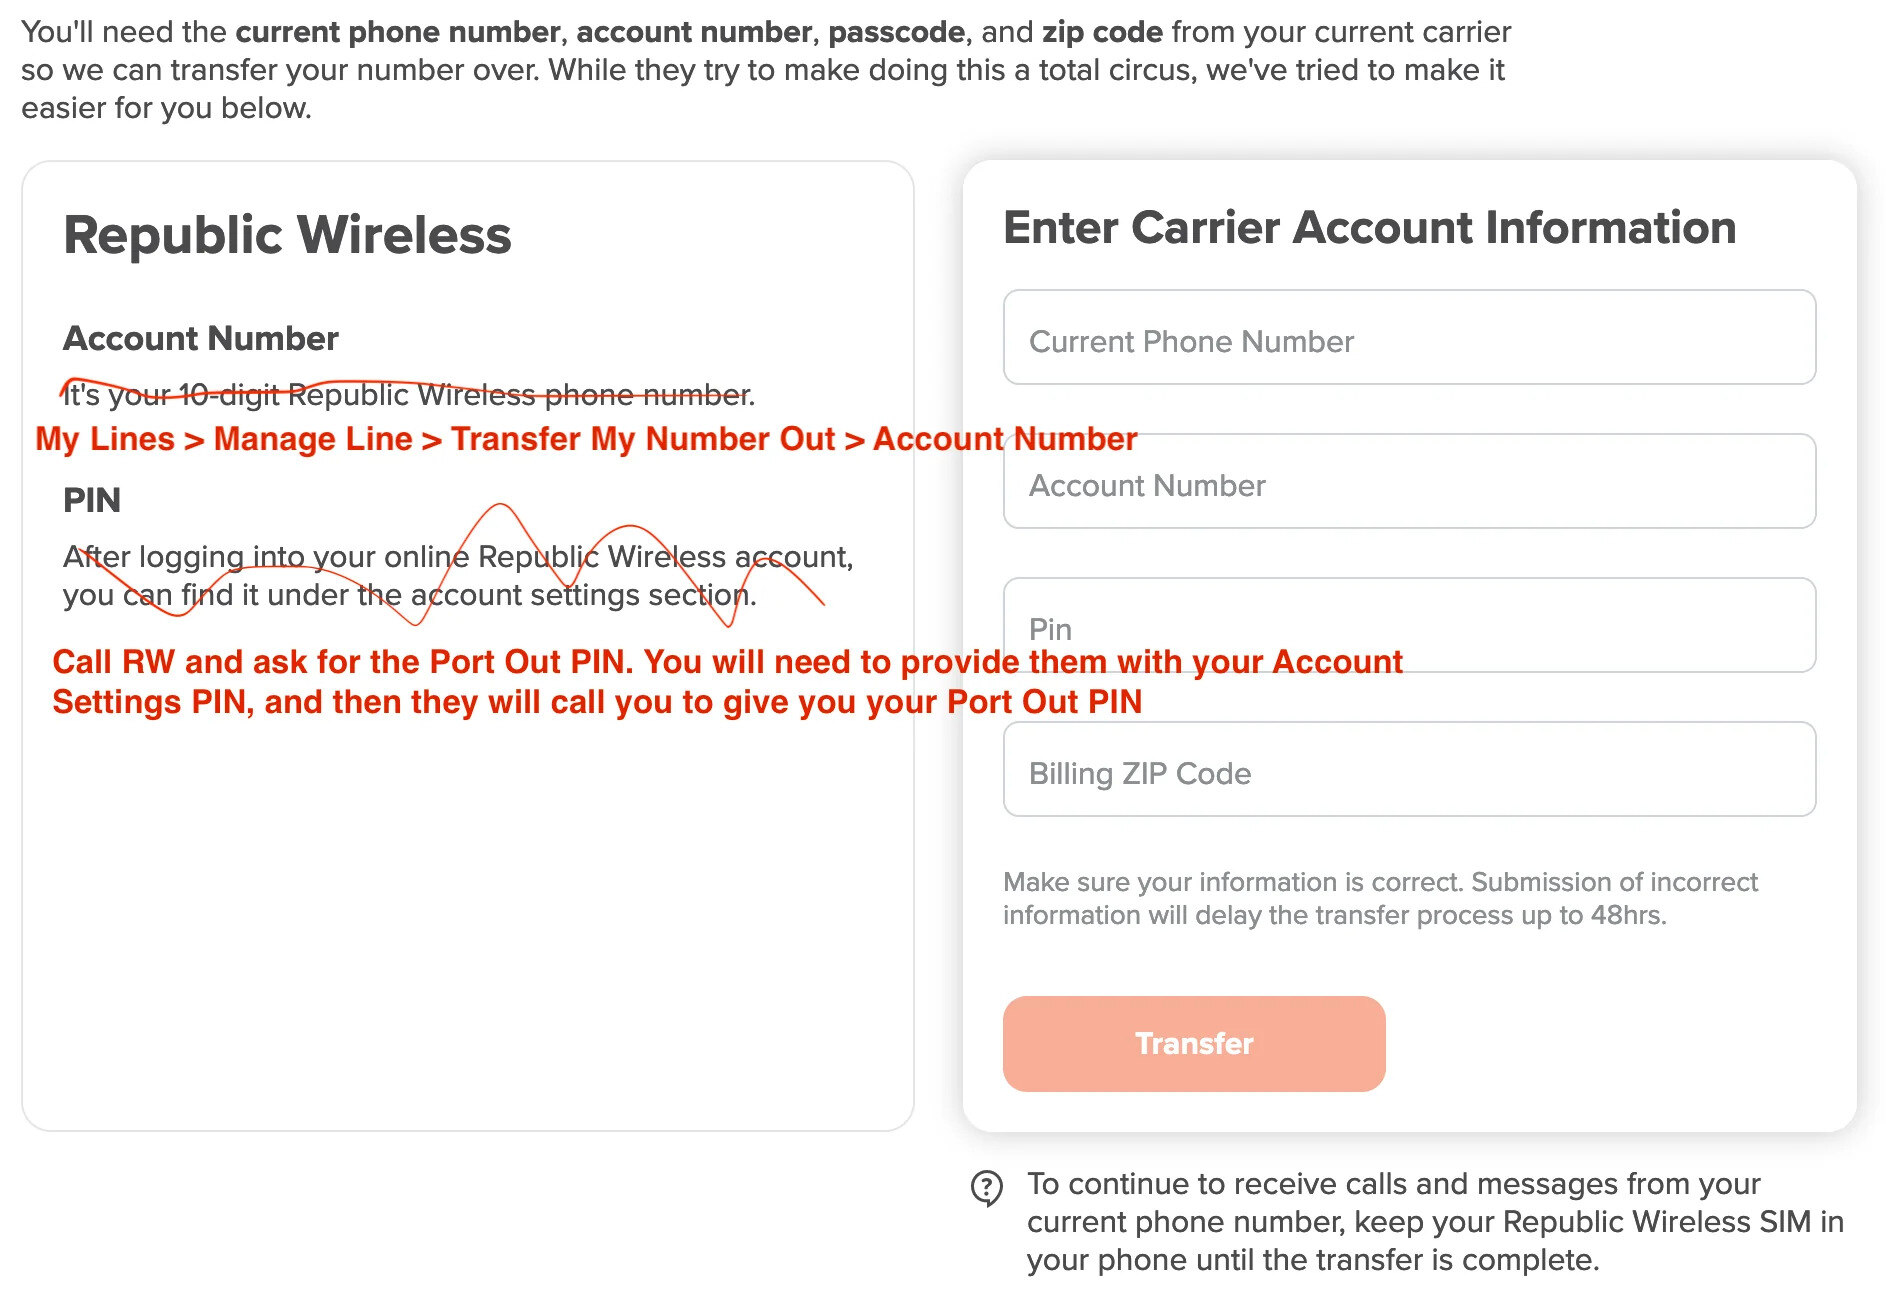 how-to-transfer-phone-number-to-republic-wireless